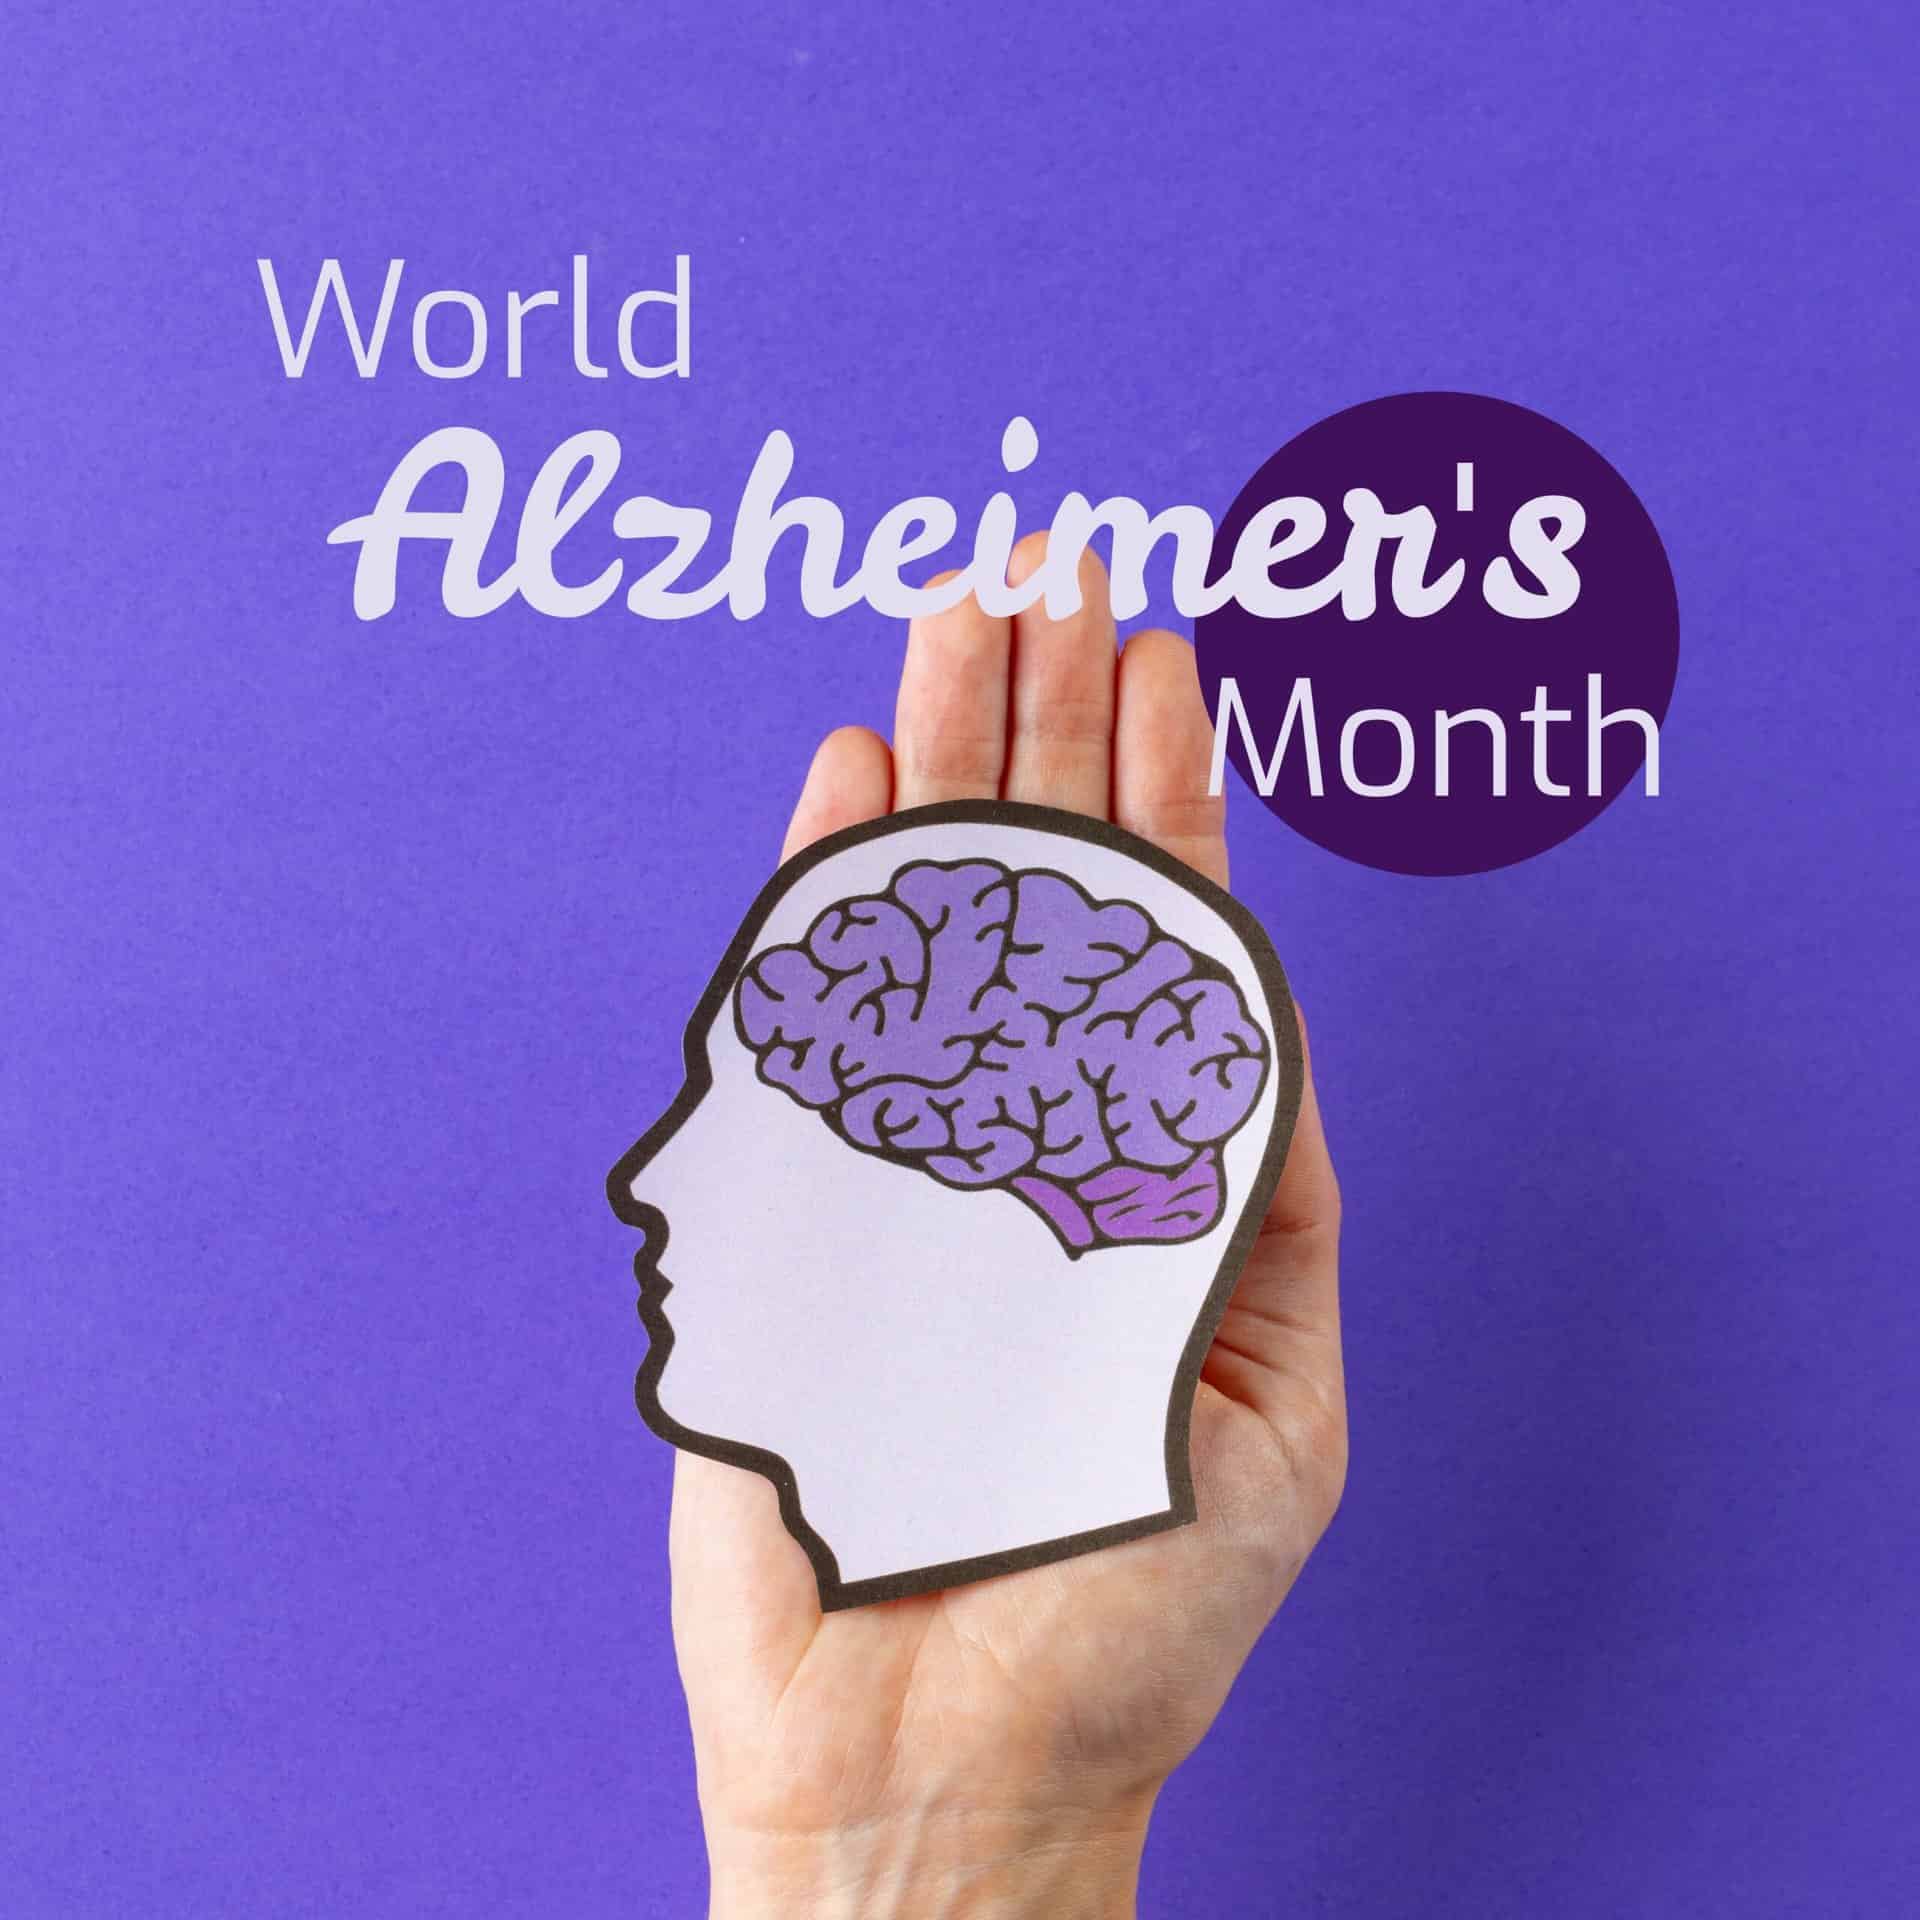 World alzheimer's month text over caucasian female hand holding head with purple brain